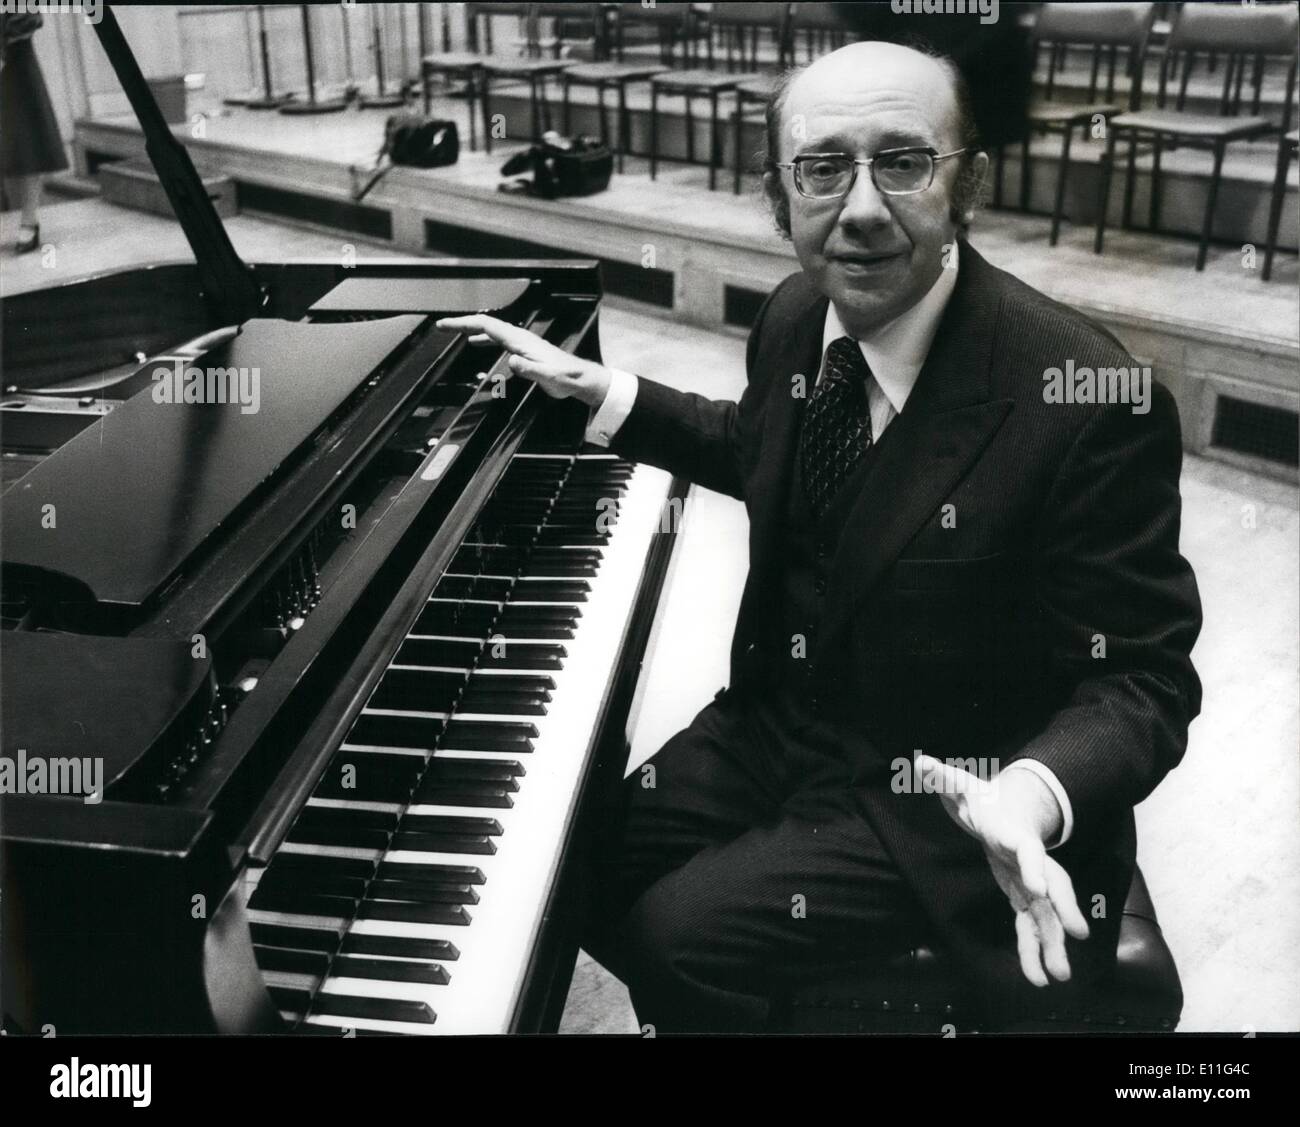 Nov. 11, 1977 - Russian Gennadi Rozhdestvensky The New BBC Symphony Orchestra's Chief Conductor At a press conference, held at Langham Gallery, the BBC announced the appointment to the BBC Symphony Orchestra of Gennadi Rozhdestvensky as Chief Conductor. The Orchestra has been without a Chief conductor since the death of Rudolf Kempe in May last year. Gennadi was born in Moscow in 1931, he has been chief conductor of the Bolshoi Theatre and USSR Radio and Television Symphony Orchestra. He made his d&eacute;but with the BBC Symphony Orchestra in 1969 with his wife, pianist Viktoria Postnikeva Stock Photo